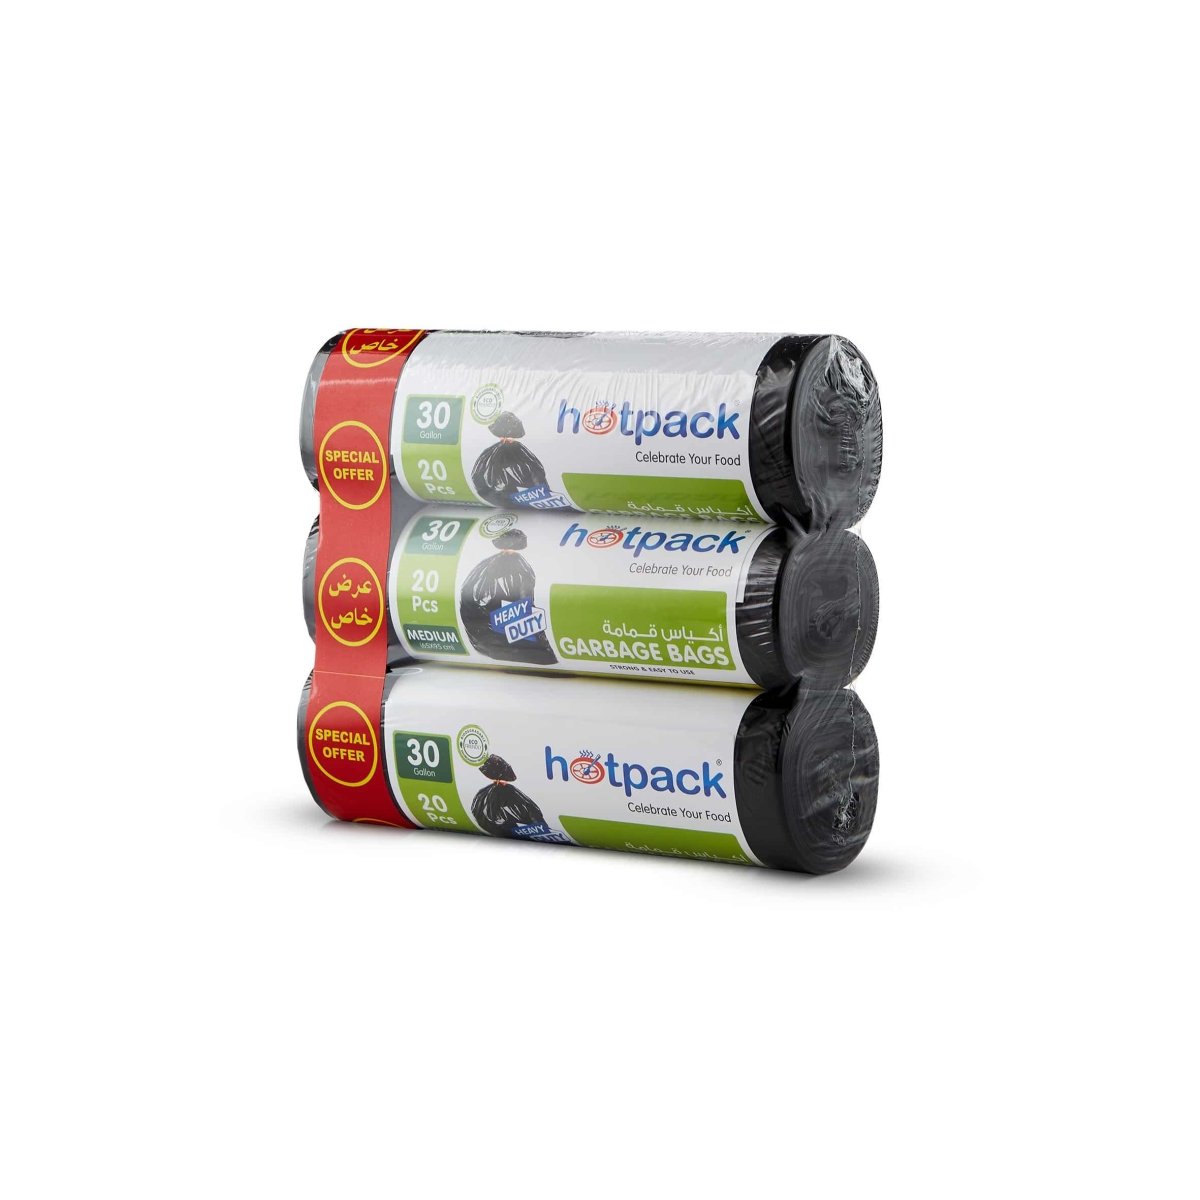 Garbage Bag Roll 65 x 95 cm Offer Pack + Garbage Bag Offer Pack Buy 2 Get 2 50 Pieces x 4 Rolls 28th Anniversary Combo - hotpackwebstore.com - 